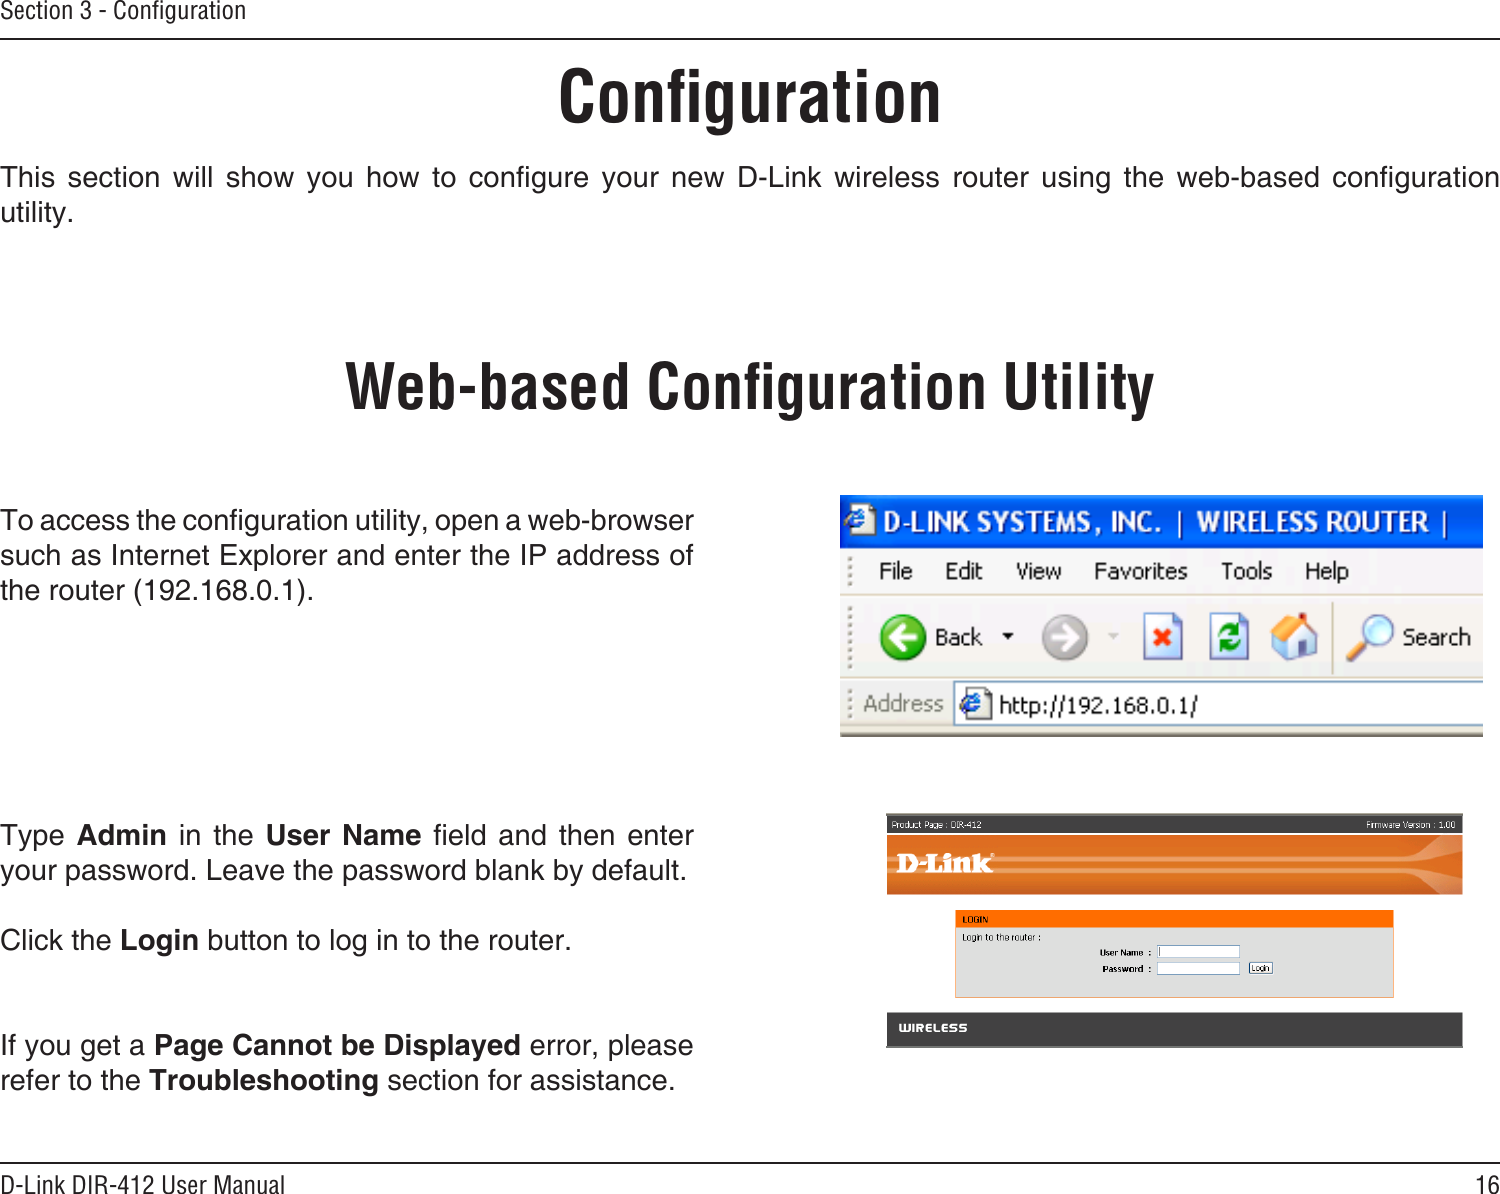 16D-Link DIR-412 User ManualSection 3 - ConﬁgurationConﬁgurationThis  section  will  show  you  how  to  congure  your  new  D-Link  wireless  router  using  the  web-based  conguration utility.Web-based Conﬁguration UtilityTo access the conguration utility, open a web-browser such as Internet Explorer and enter the IP address of the router (192.168.0.1).Type  Admin  in  the  User  Name  eld  and  then  enter your password. Leave the password blank by default. Click the Login button to log in to the router.If you get a Page Cannot be Displayed error, please refer to the Troubleshooting section for assistance.